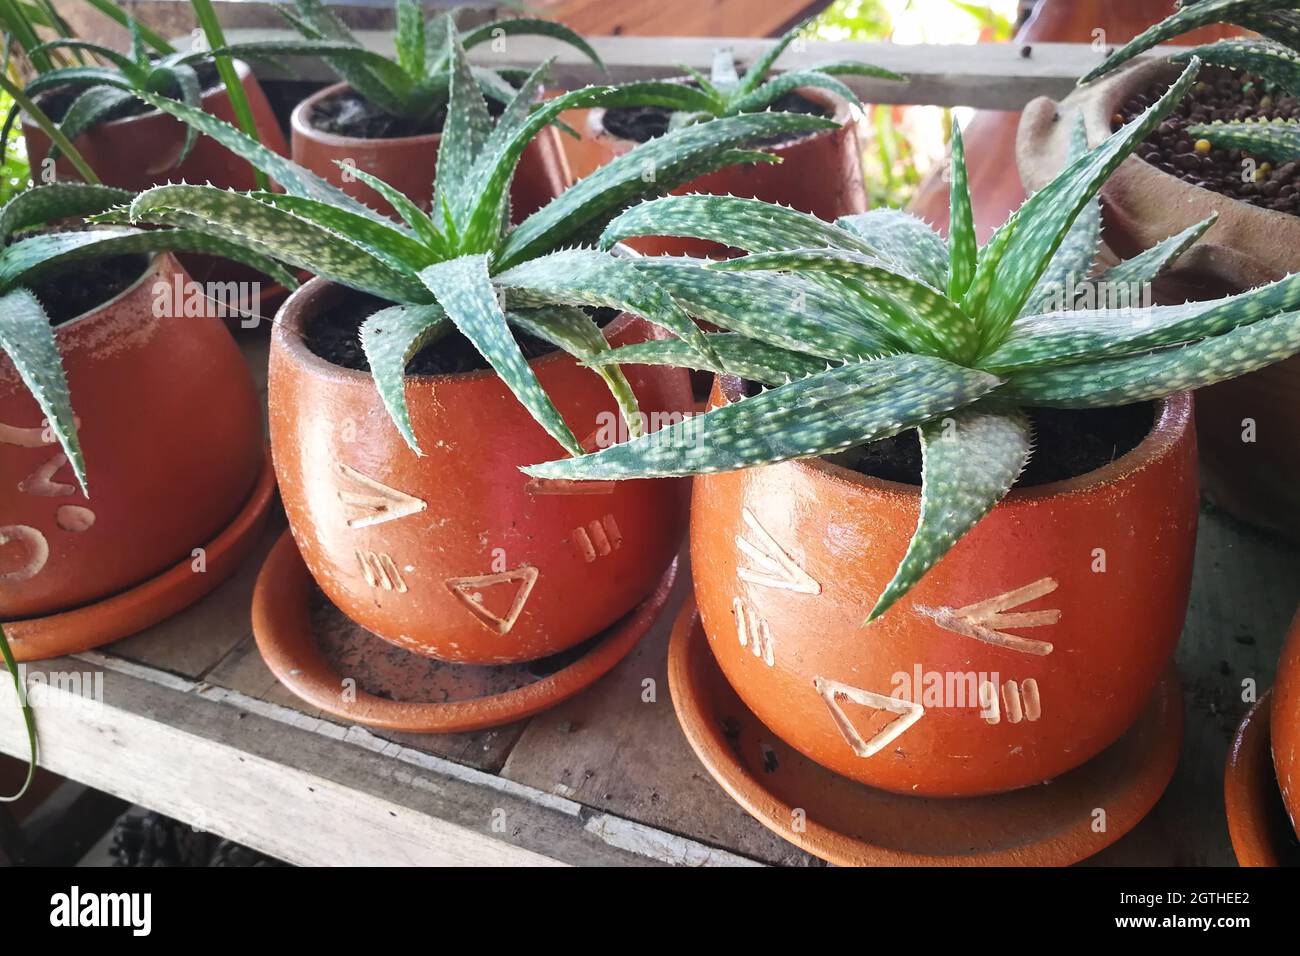 Close-up Of Aloe Vera Plants In Potted Plants On Table Stock Photo